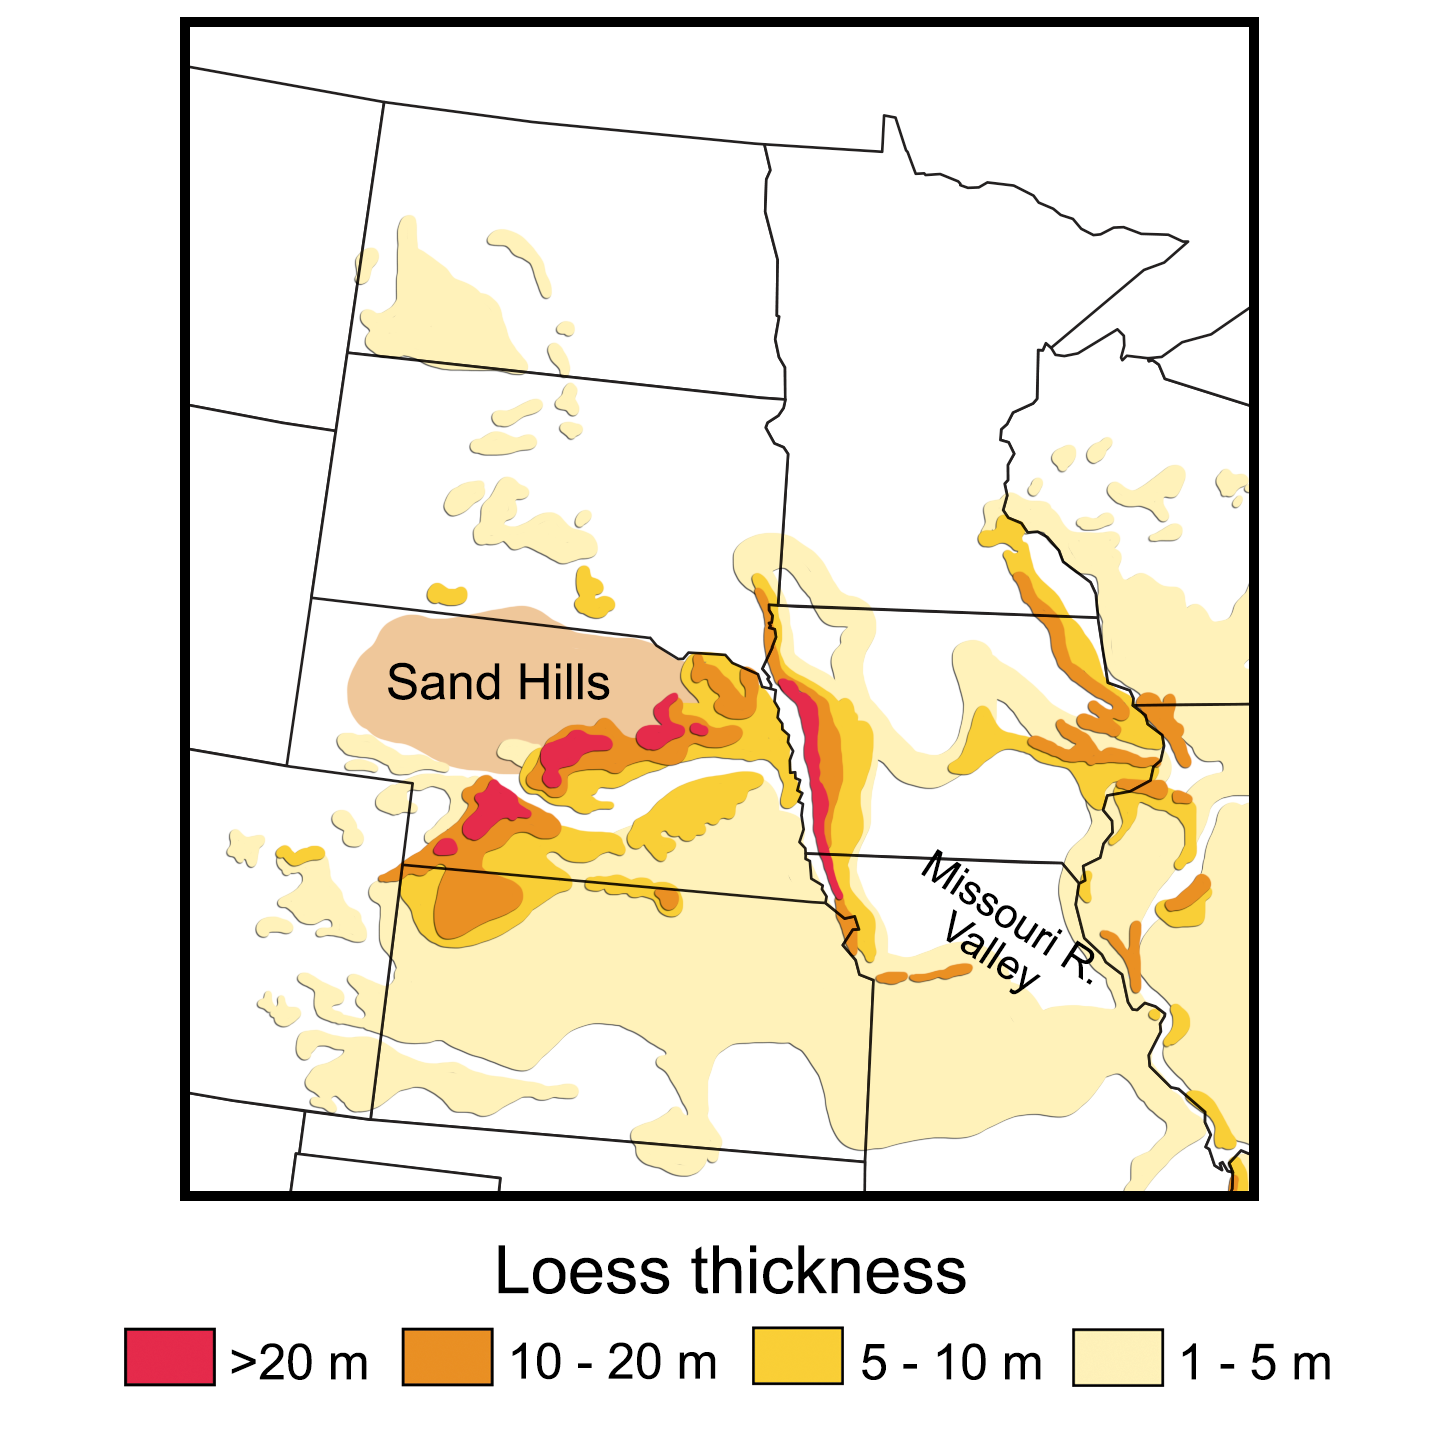 Map showing the central United States (North and South Dakota, Nebraska, Kansas, Minnesota, Iowa, Missouri) shaded to show the distribution and thickness of loess deposits. Of note in the northwest-central region, loess occurs from northeastern to southwestern Nebraska, and sporadically in the Dakotas. The thickest deposits are in a narrow band in Nebraska. The sandhills in northern Nebraska are also indicated.